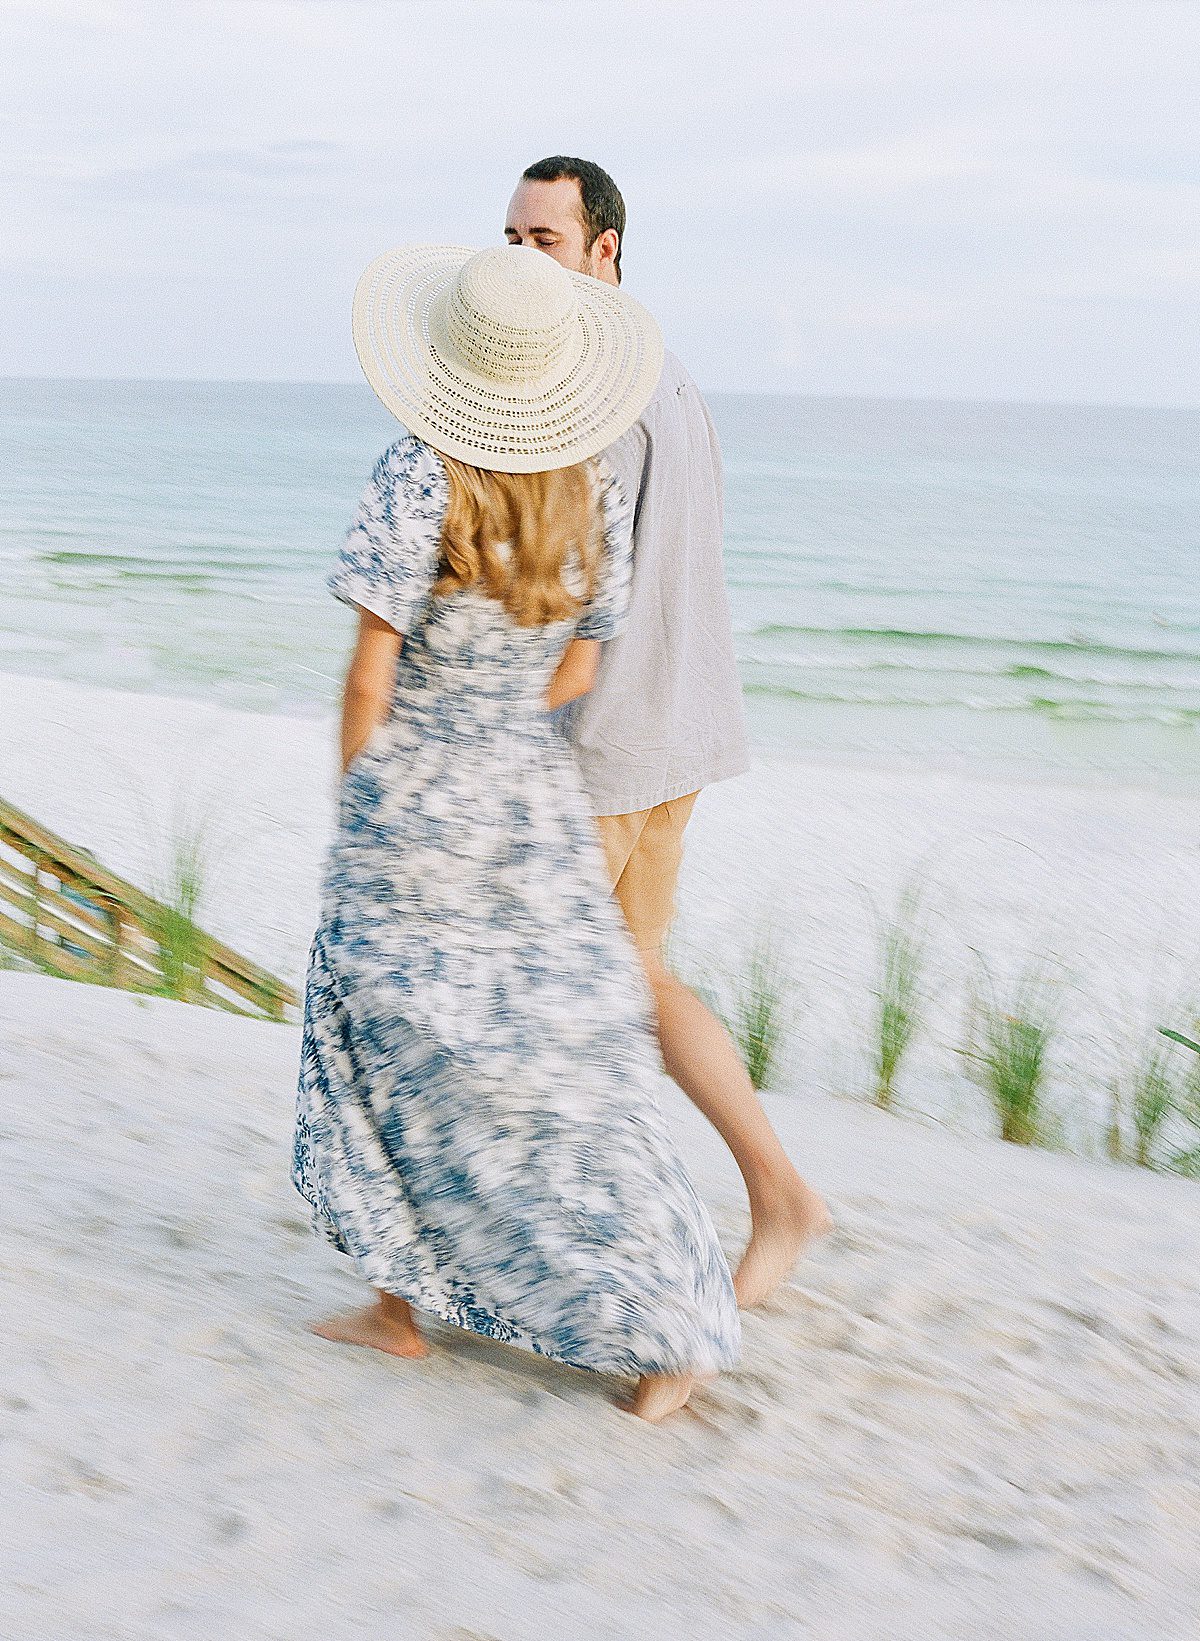 Motion Blur Photo Of Couple Walking in The Sand Photo